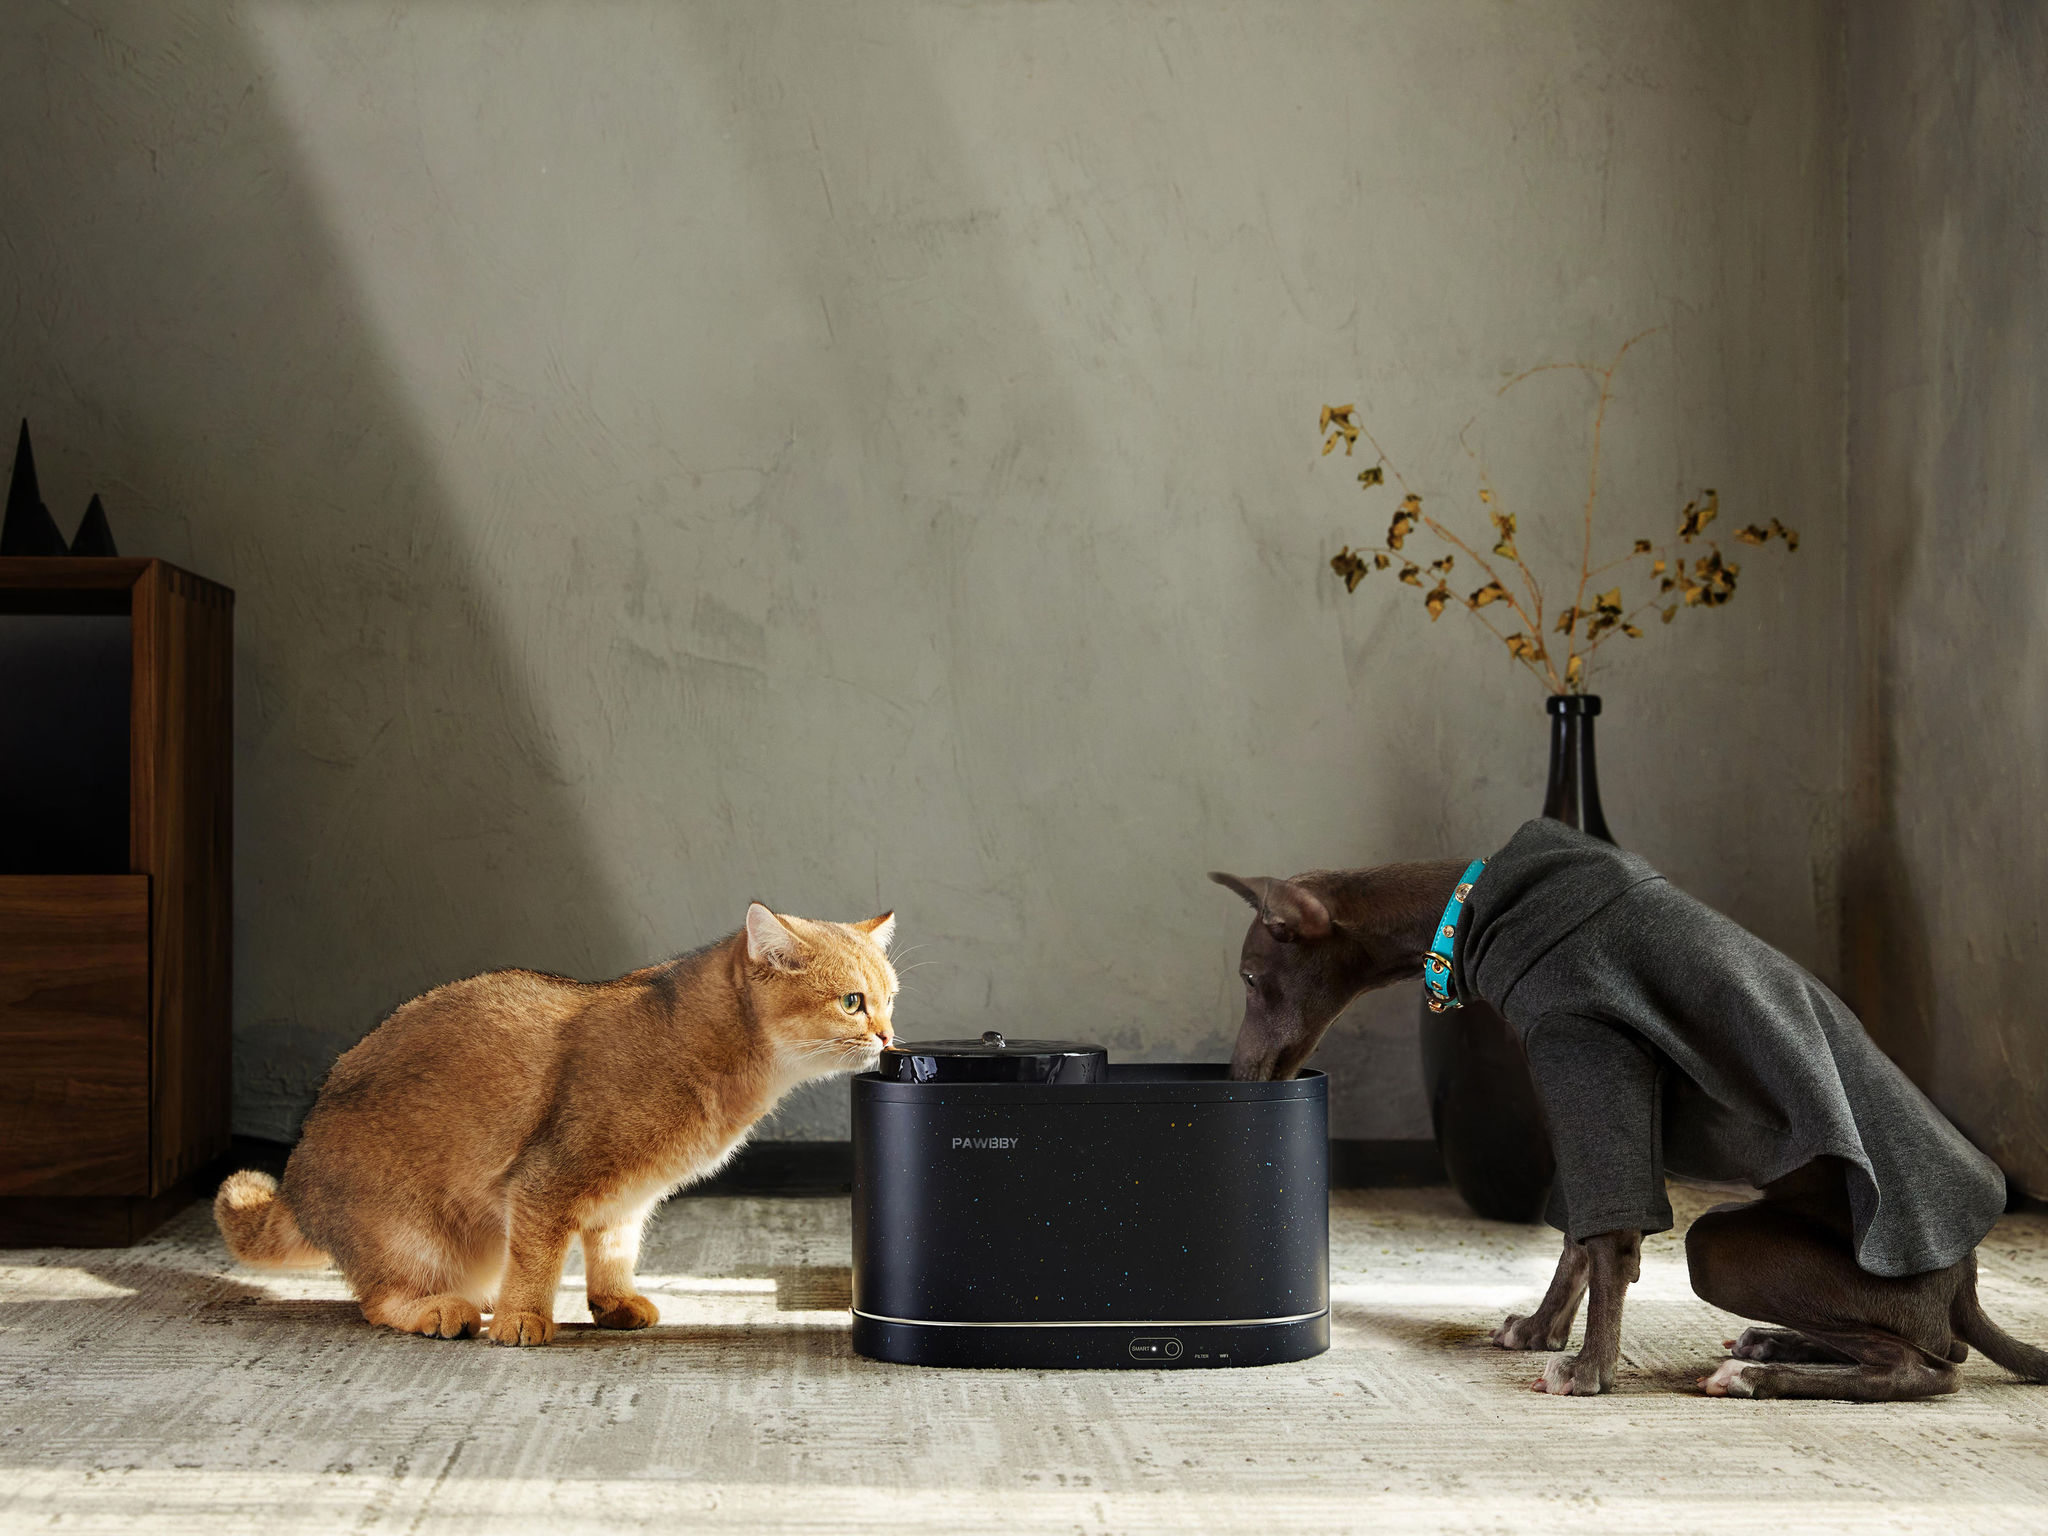 Pawbby Smart Pet Water Fountain